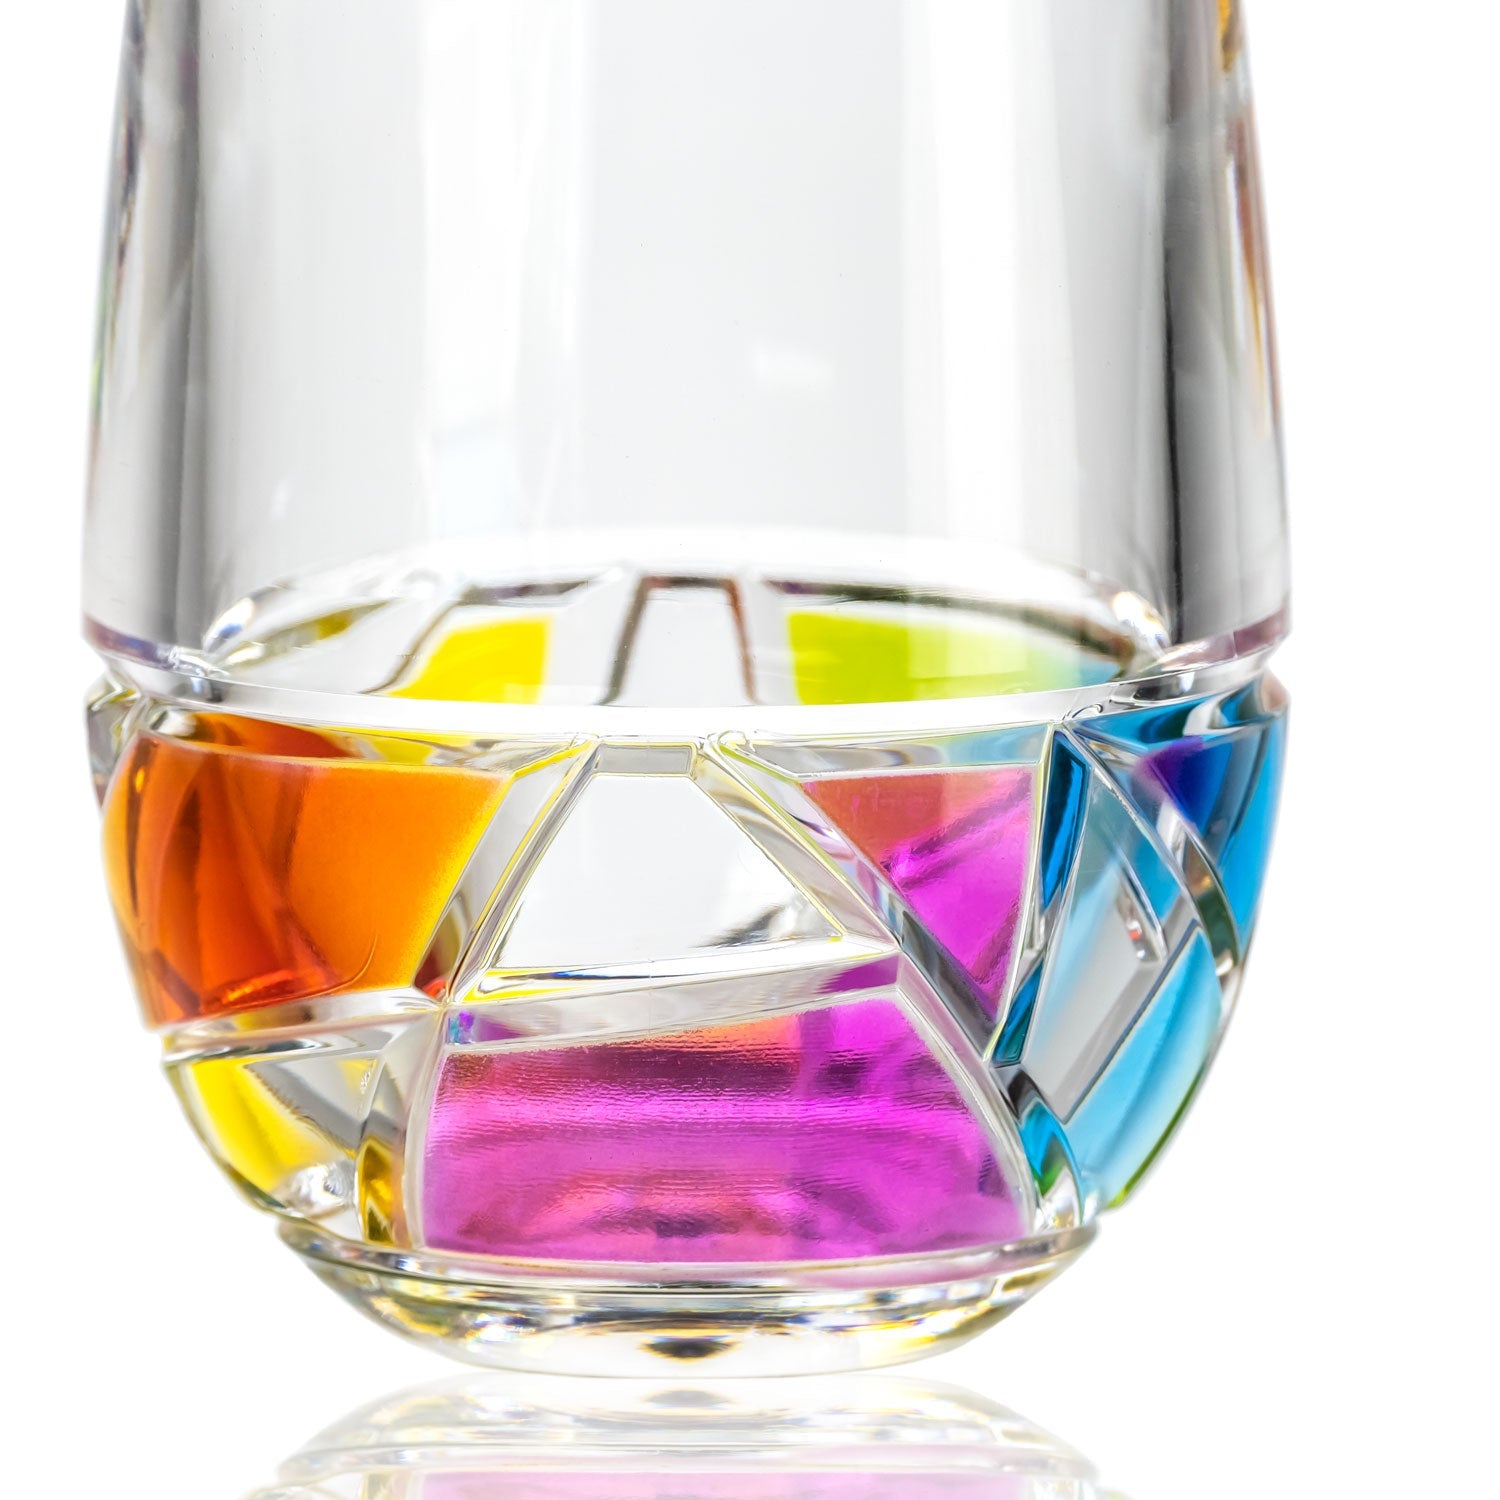 10oz rainbow acrylic tumbler glass from Merritt Designs' Mosaic Collection detailed view